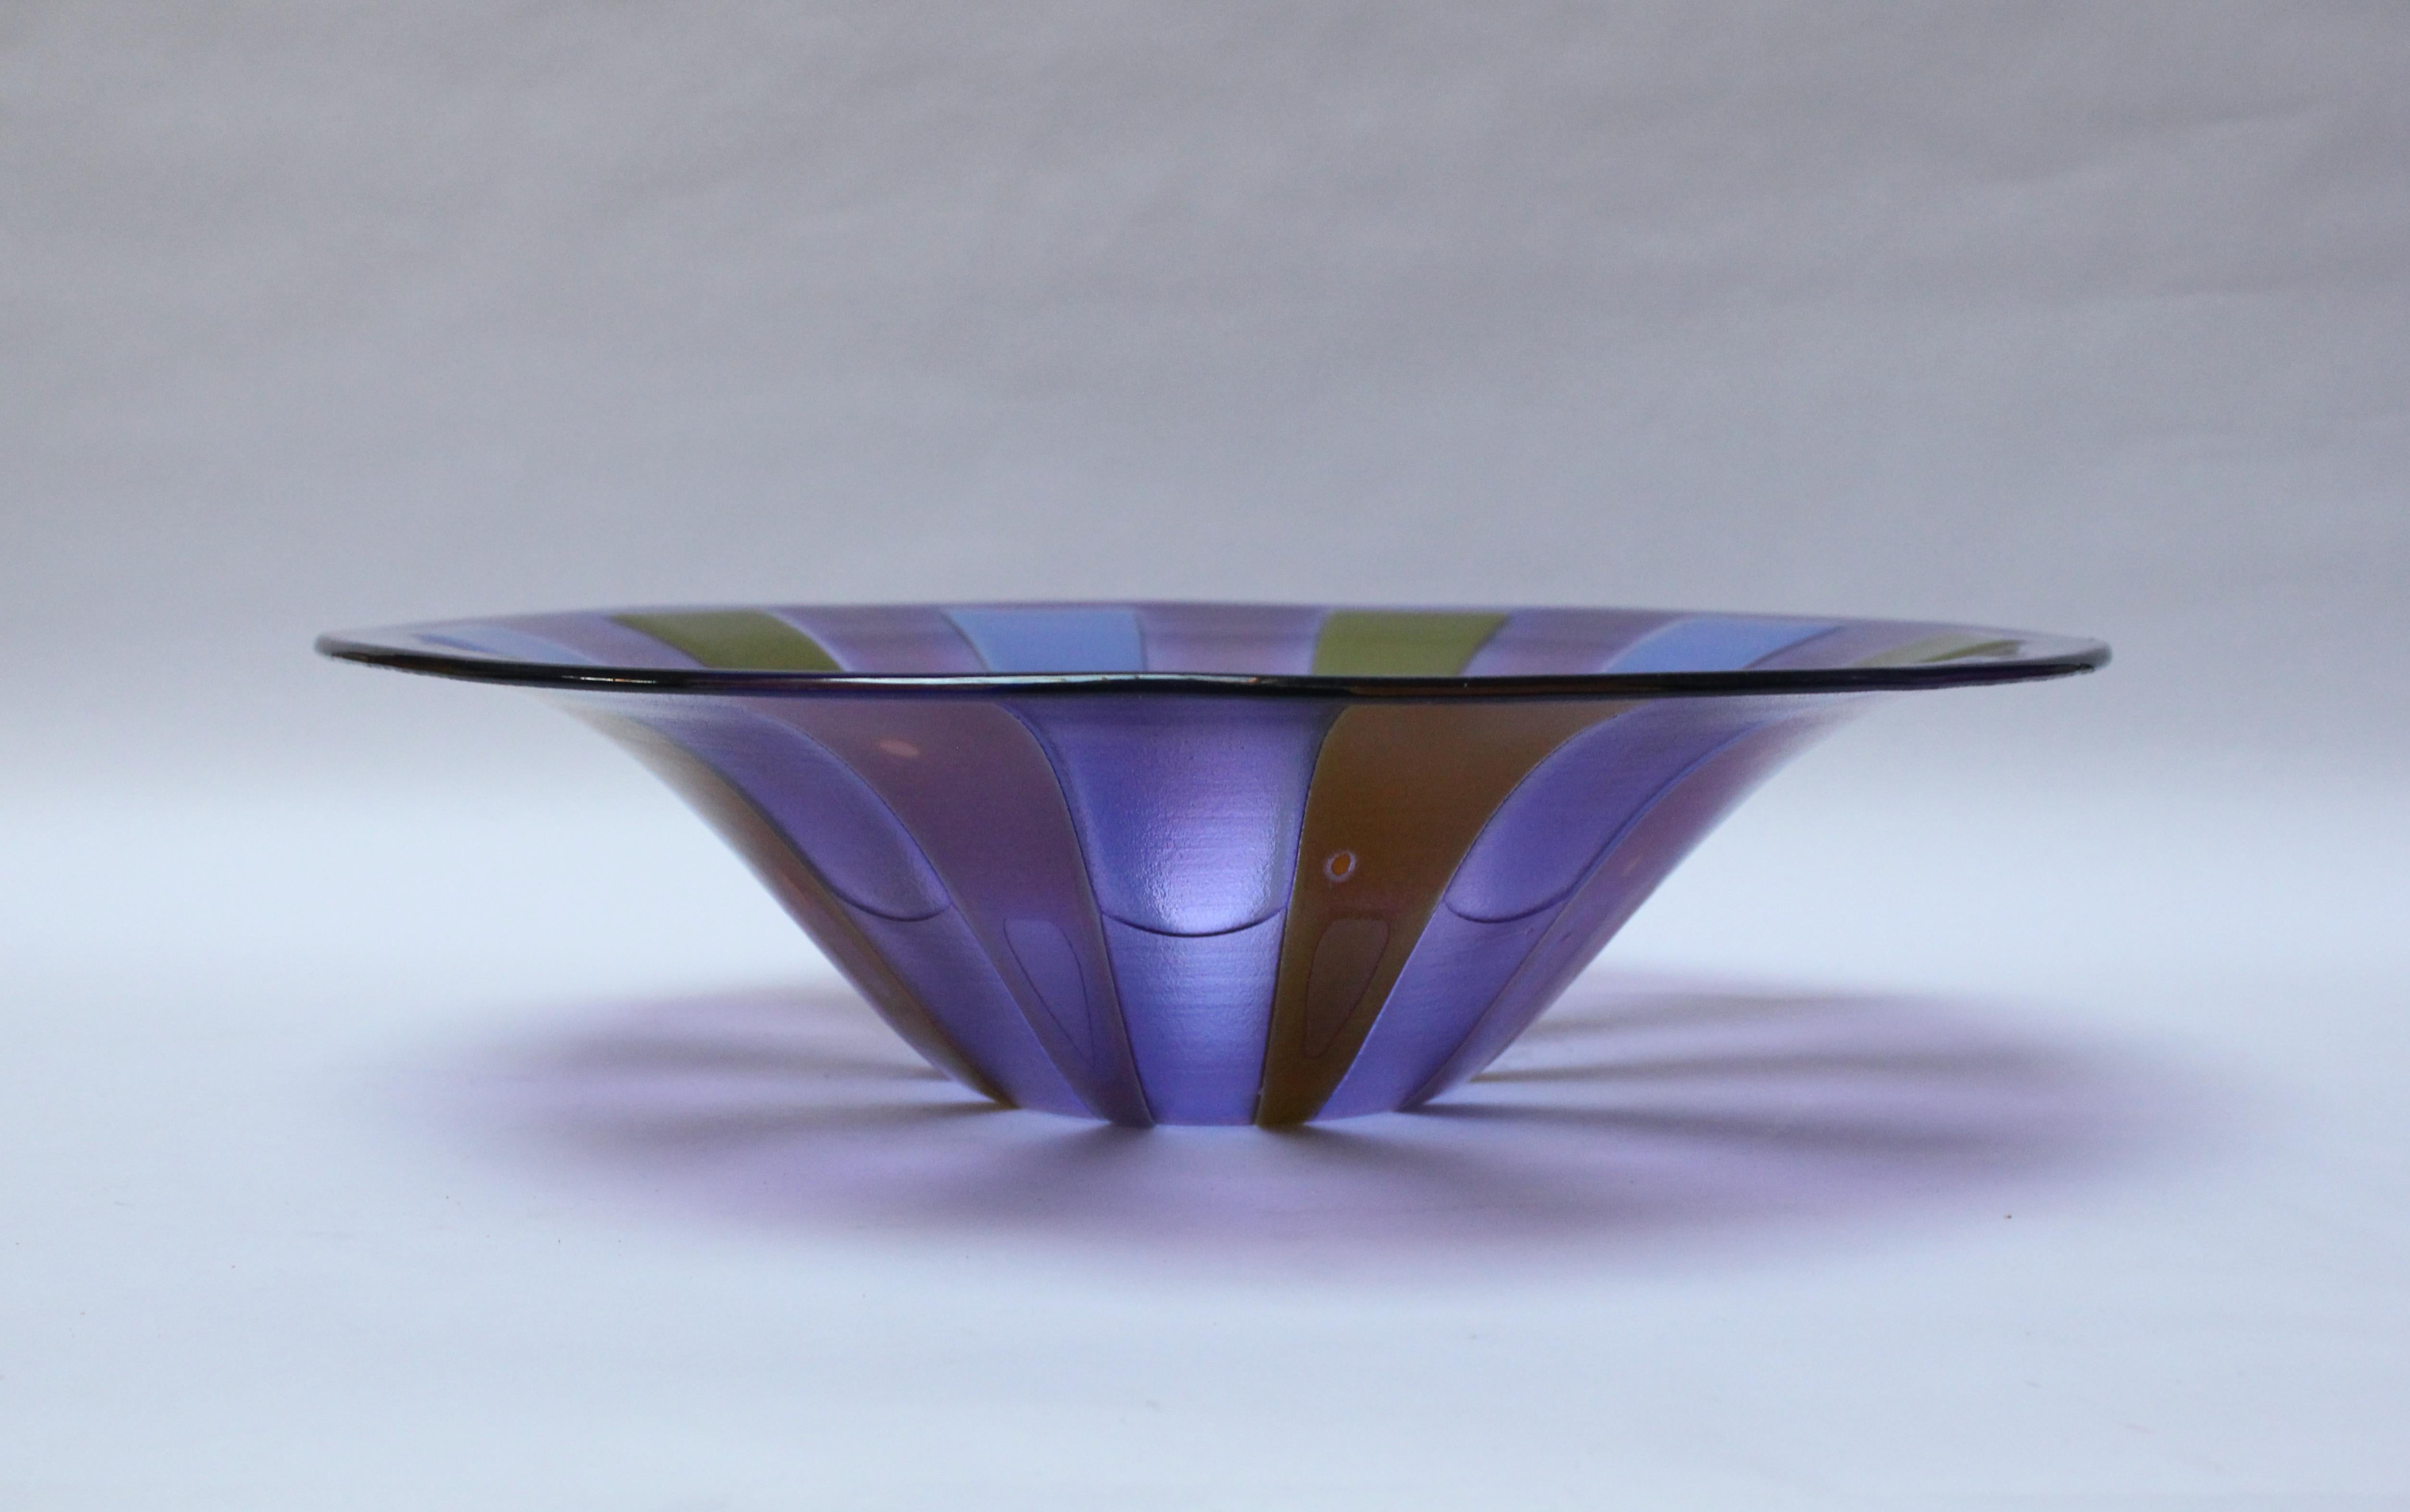 Large glass bowl by Frances and Michael Higgins for Higgins Glass Studio (ca. 1960s, USA).
Labor intensive hand-fused method employed, which entails hand-painting glass segments on a single piece of enamel-coated glass then laying another piece of